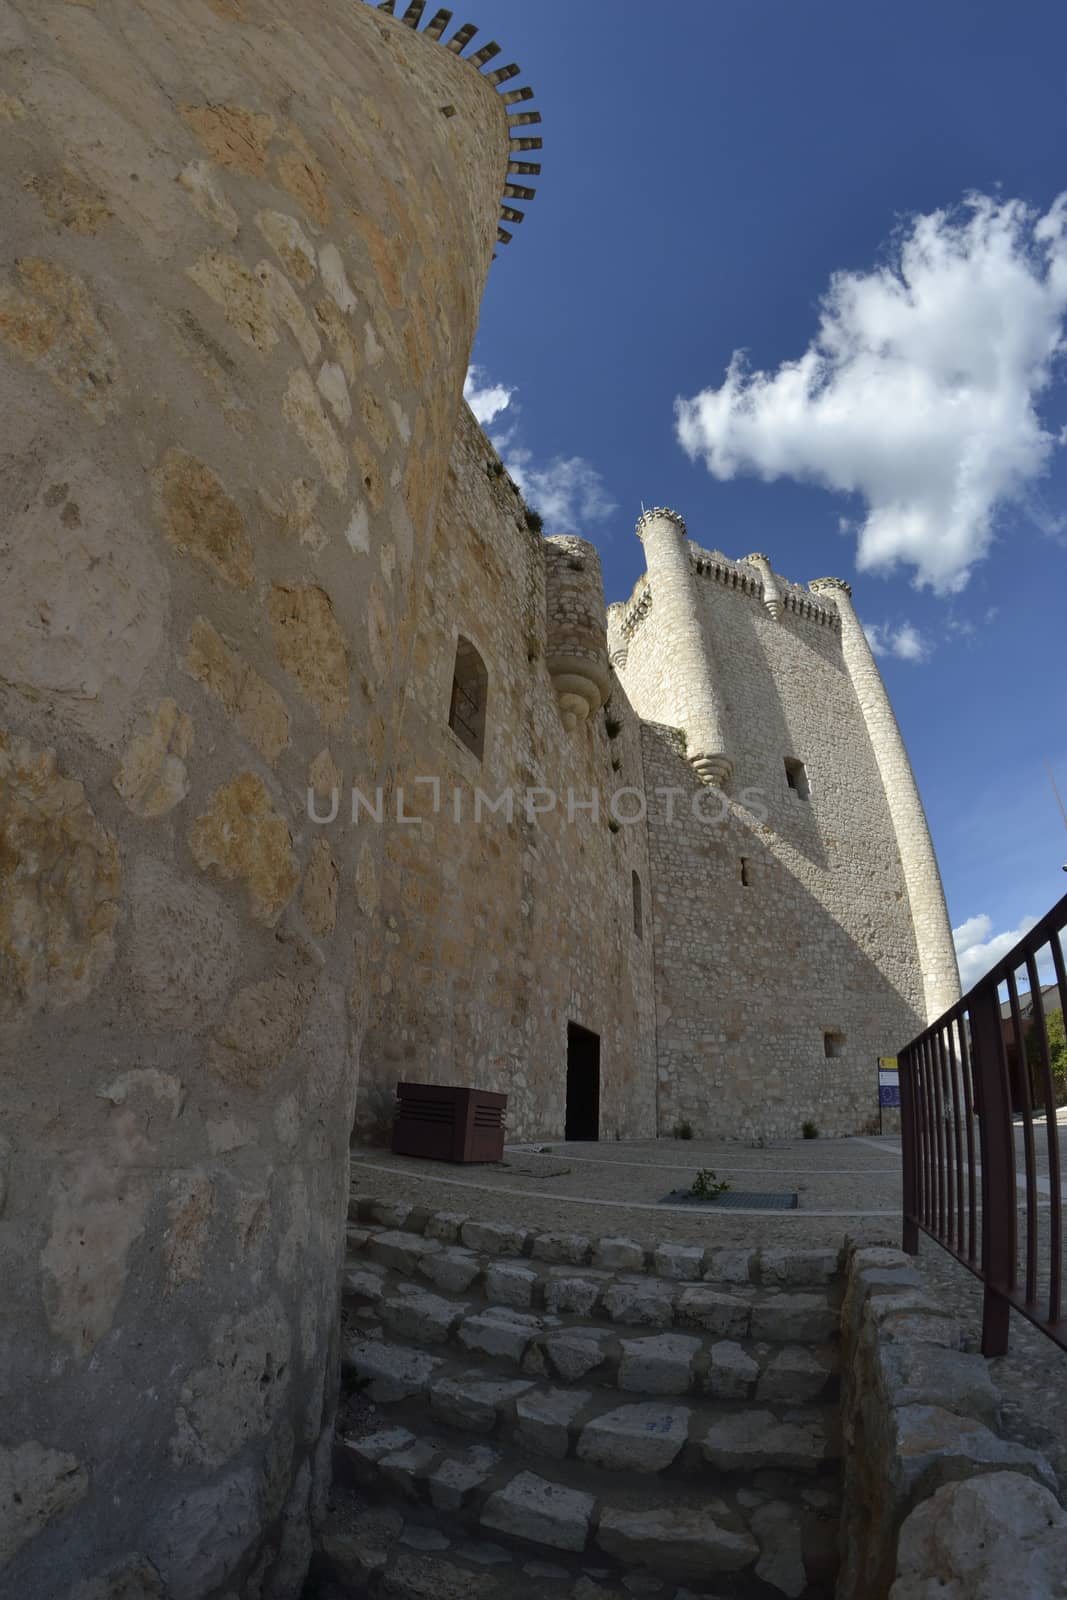 Torija castle through a fisheye lens. Spain. Sunny day with a few clouds in spring.